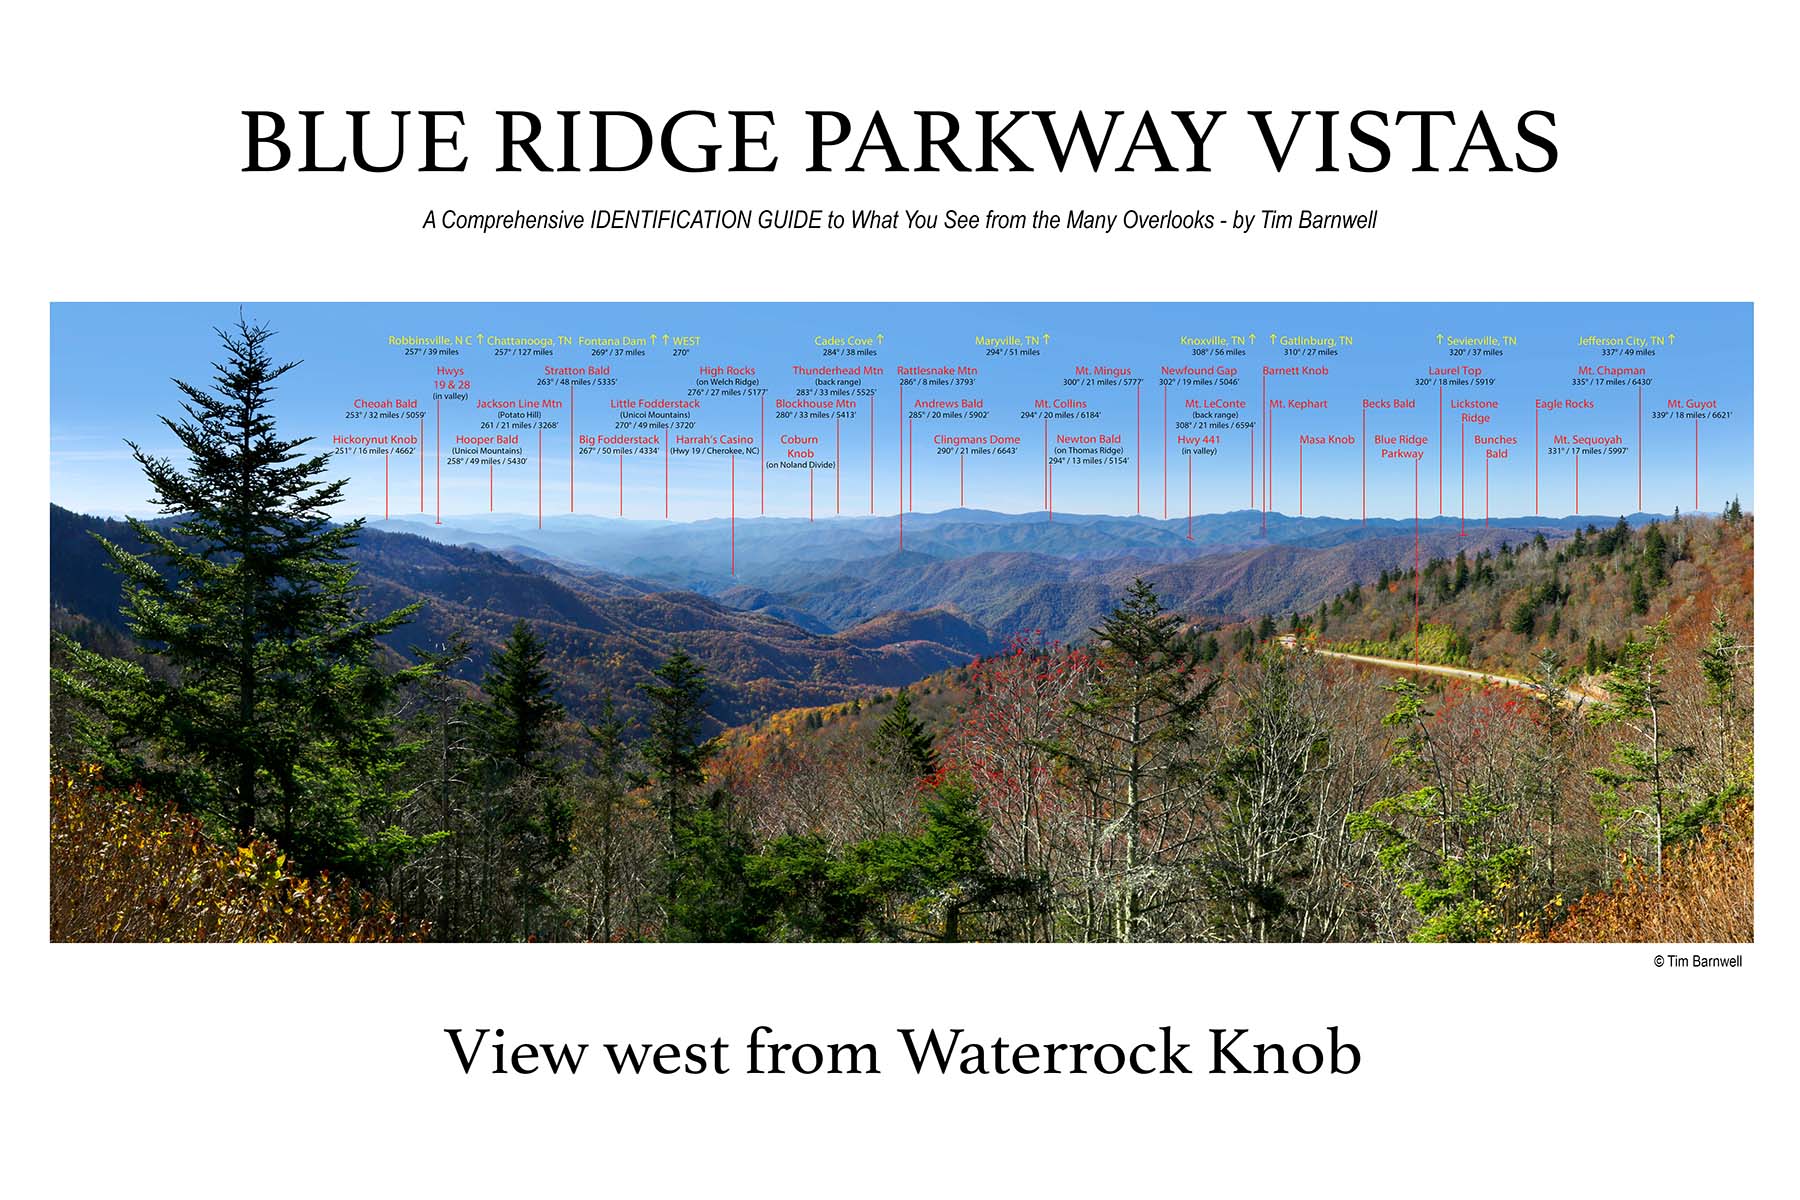 Blue Ridge Parkway Vistas Great Smoky Mountains nNational Park Vistas book  signings for saleView west from Waterrock Knob - Poster — TIM BARNWELL